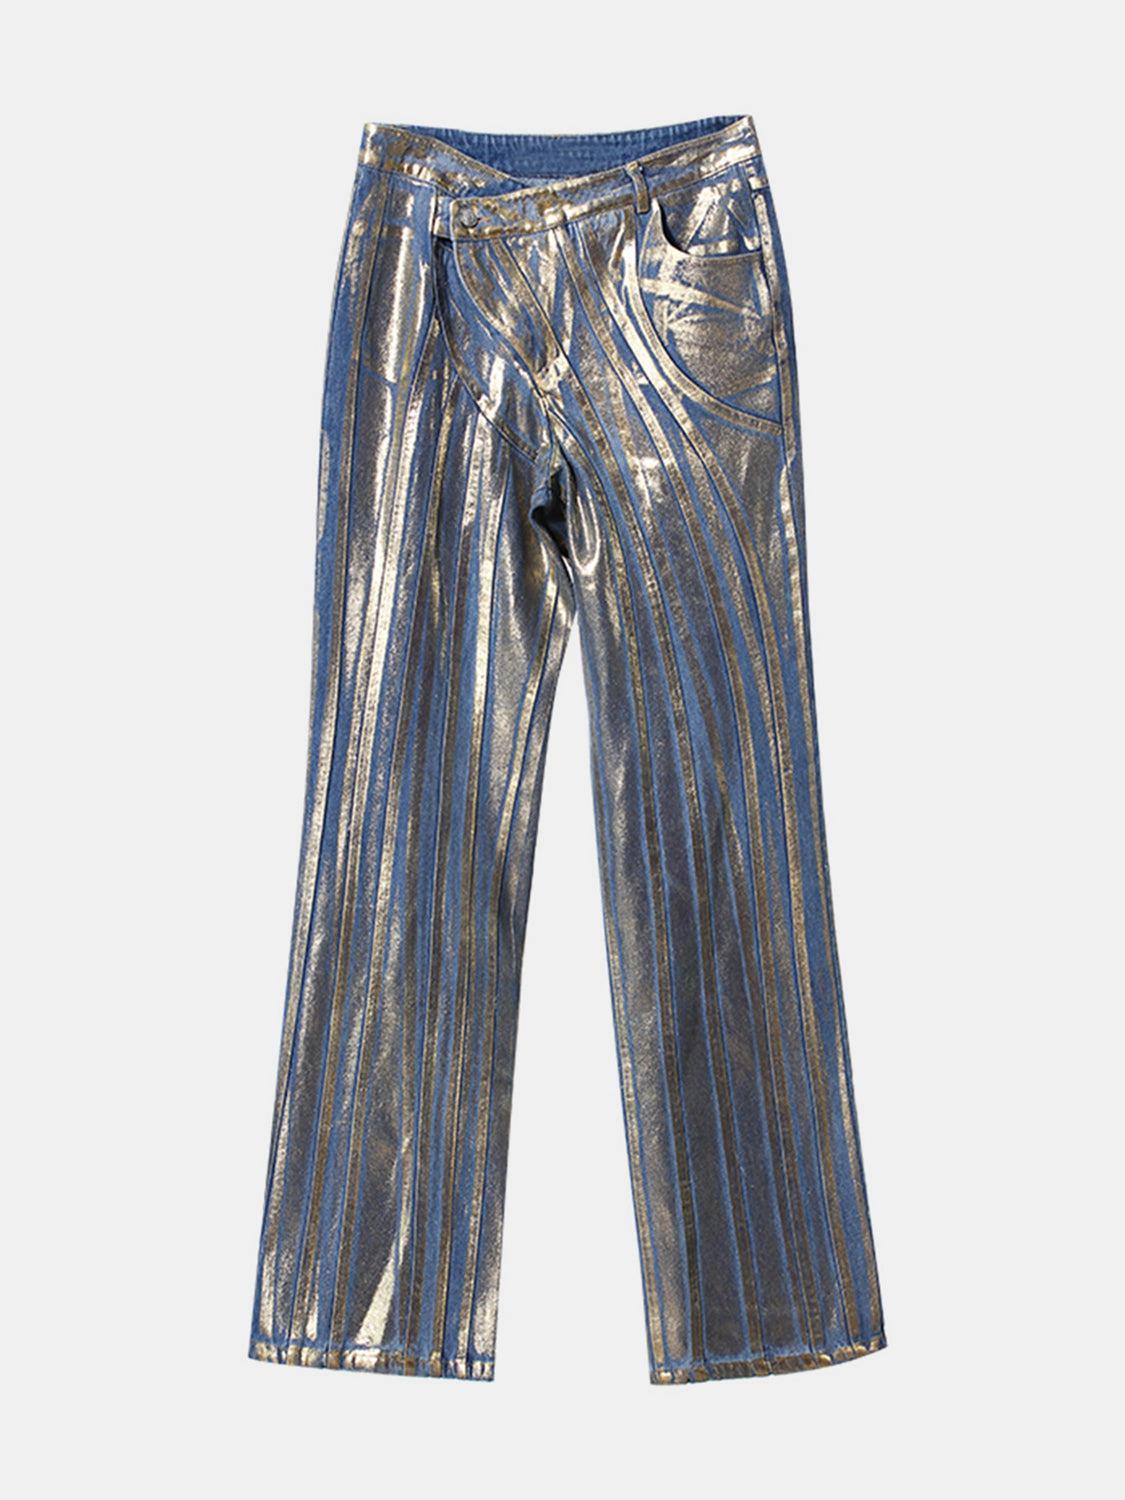 a pair of metallic pants on a white background